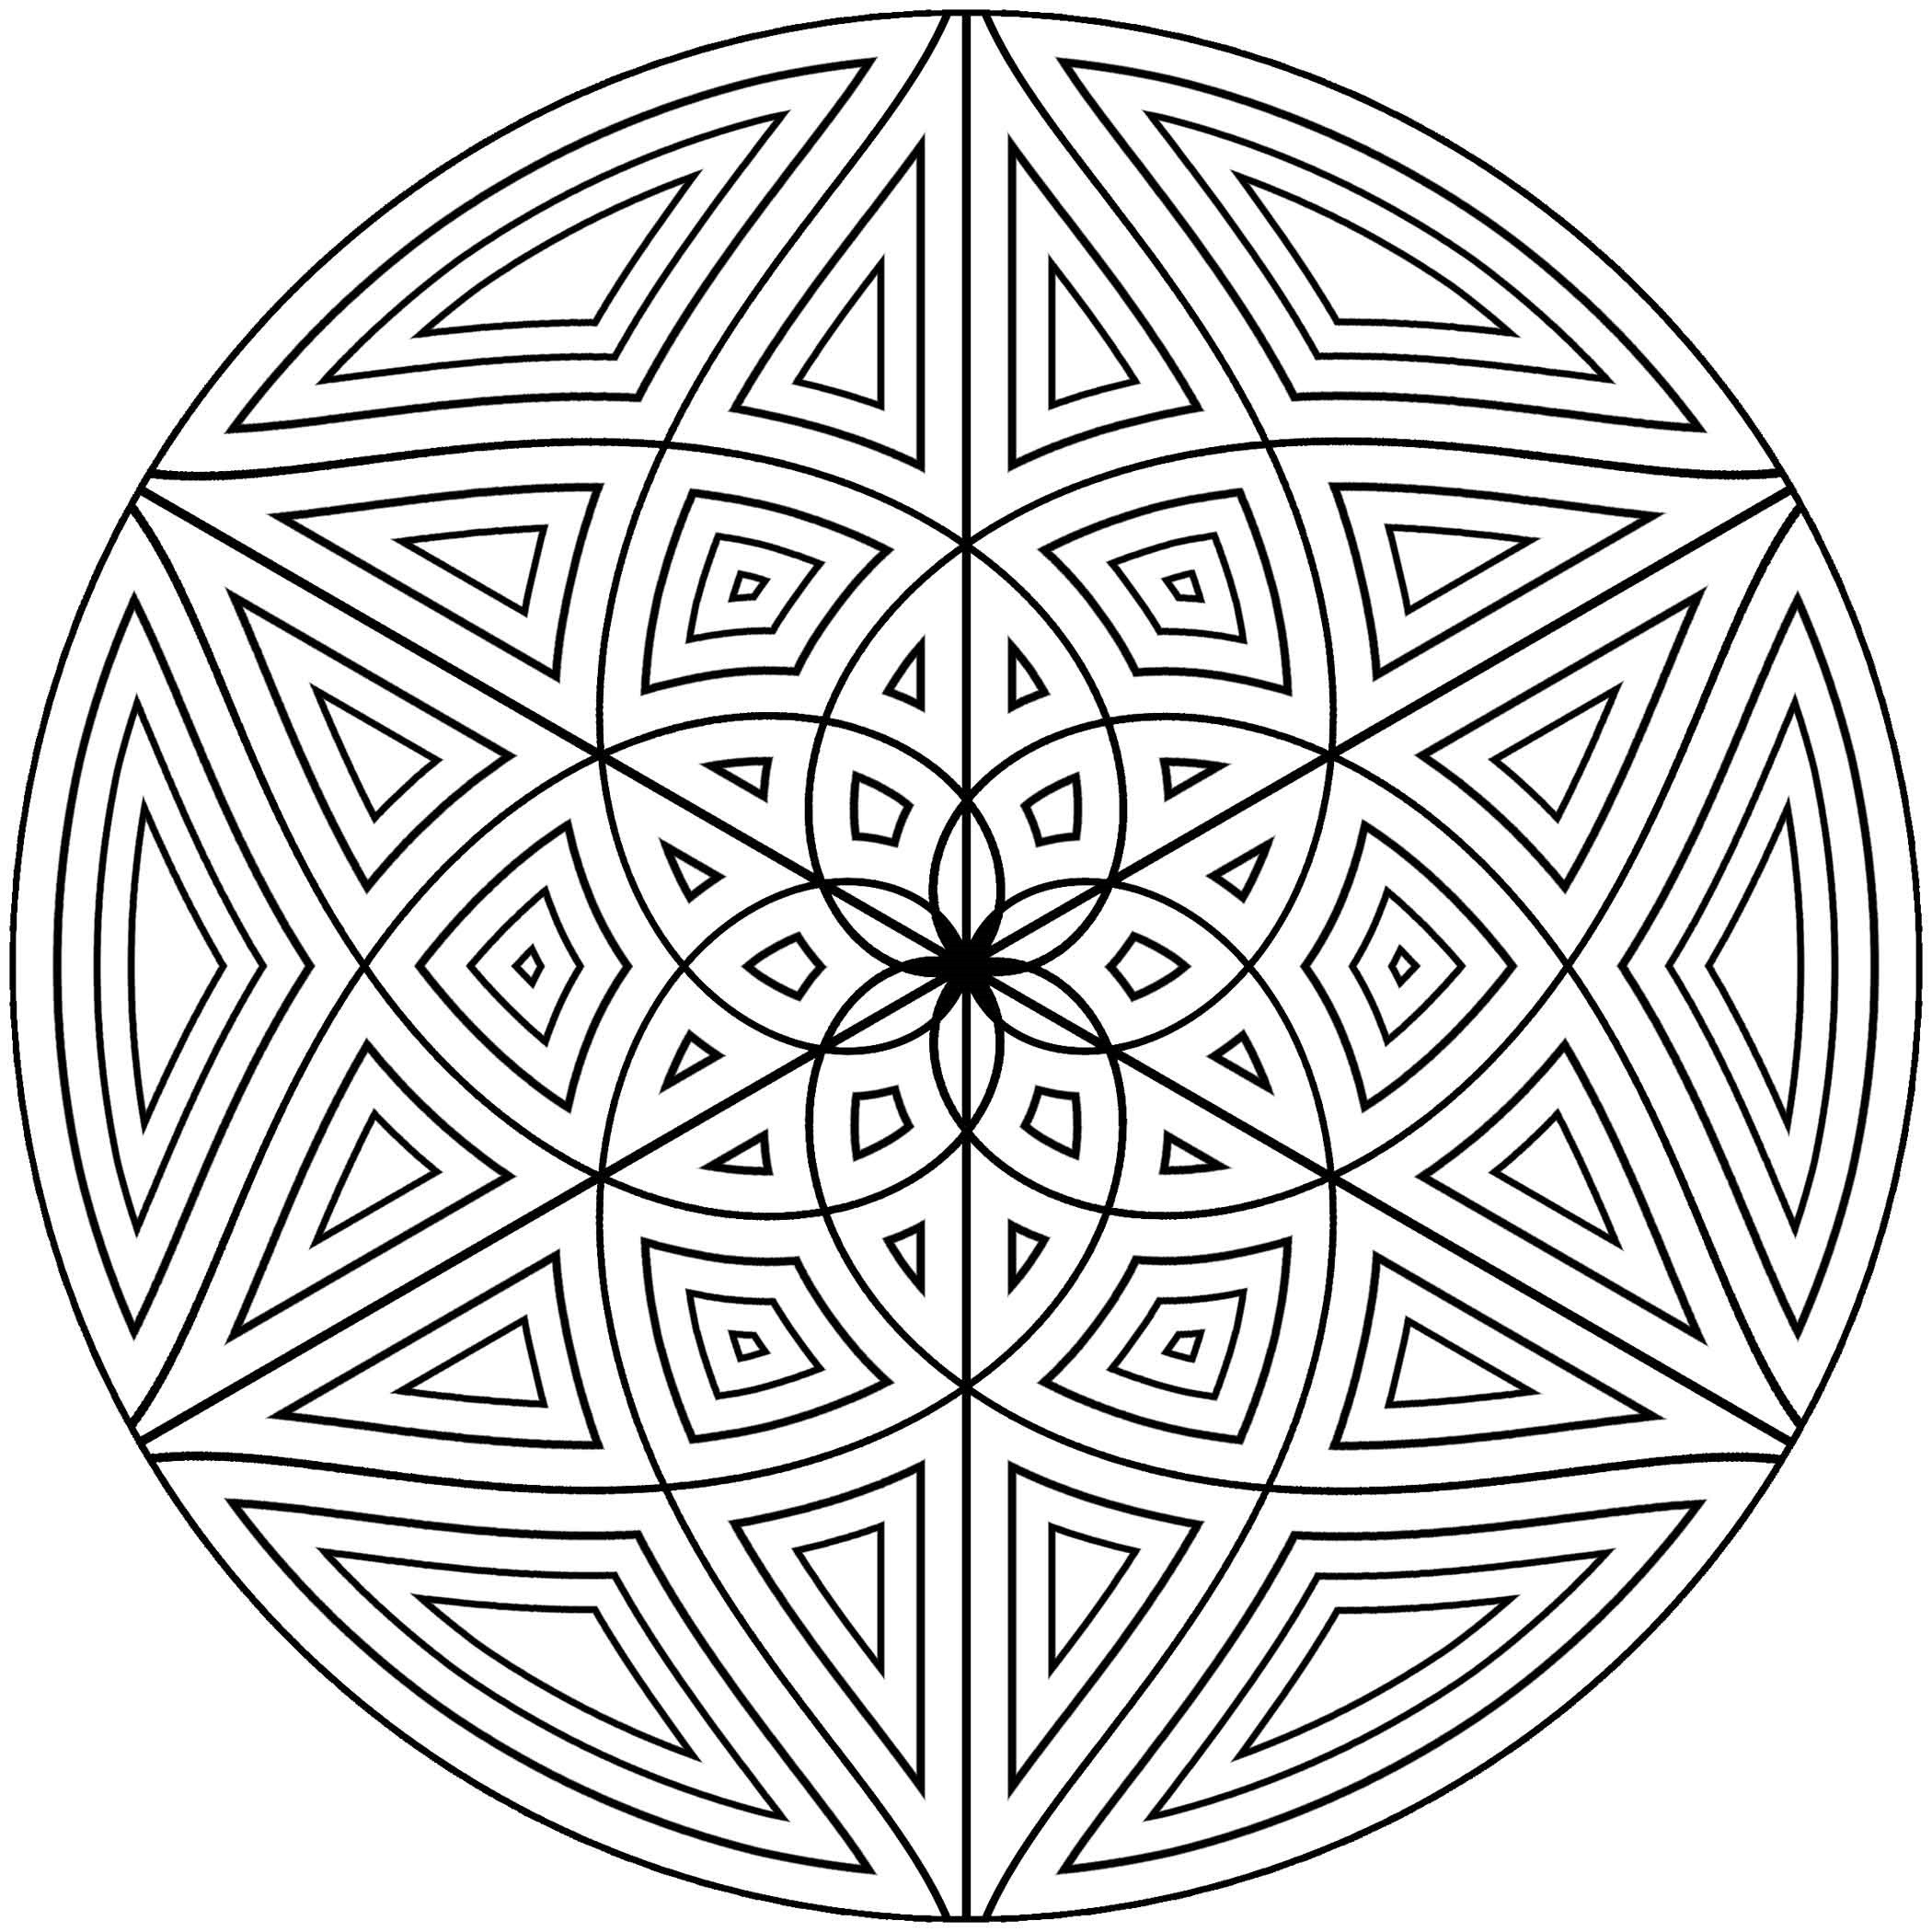 Pattern Coloring Pages For Adults
 Free Printable Geometric Coloring Pages for Adults